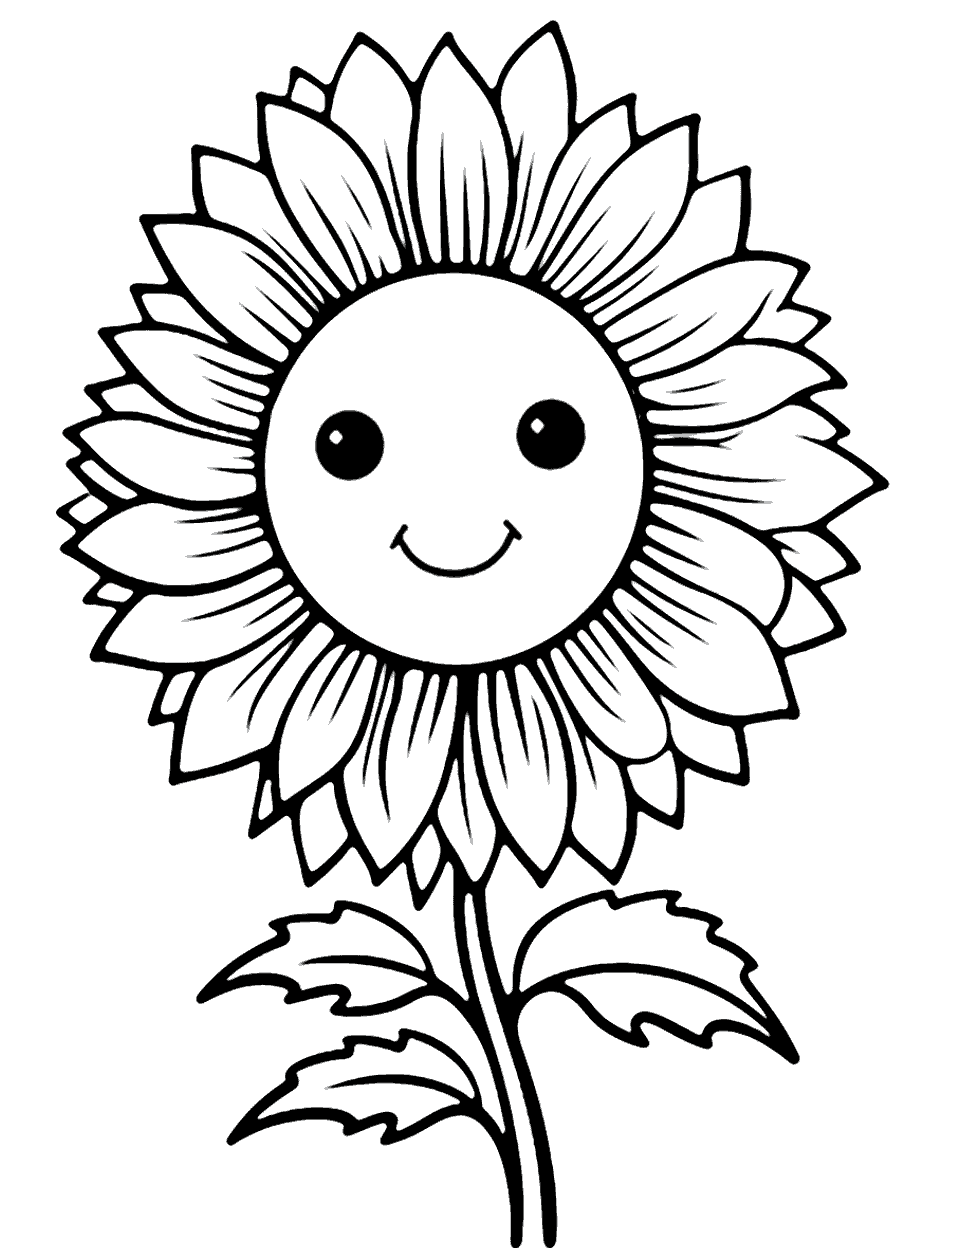 Cute Cartoon Sunflower Coloring Page - A whimsical, cute cartoon-style sunflower with a happy face.